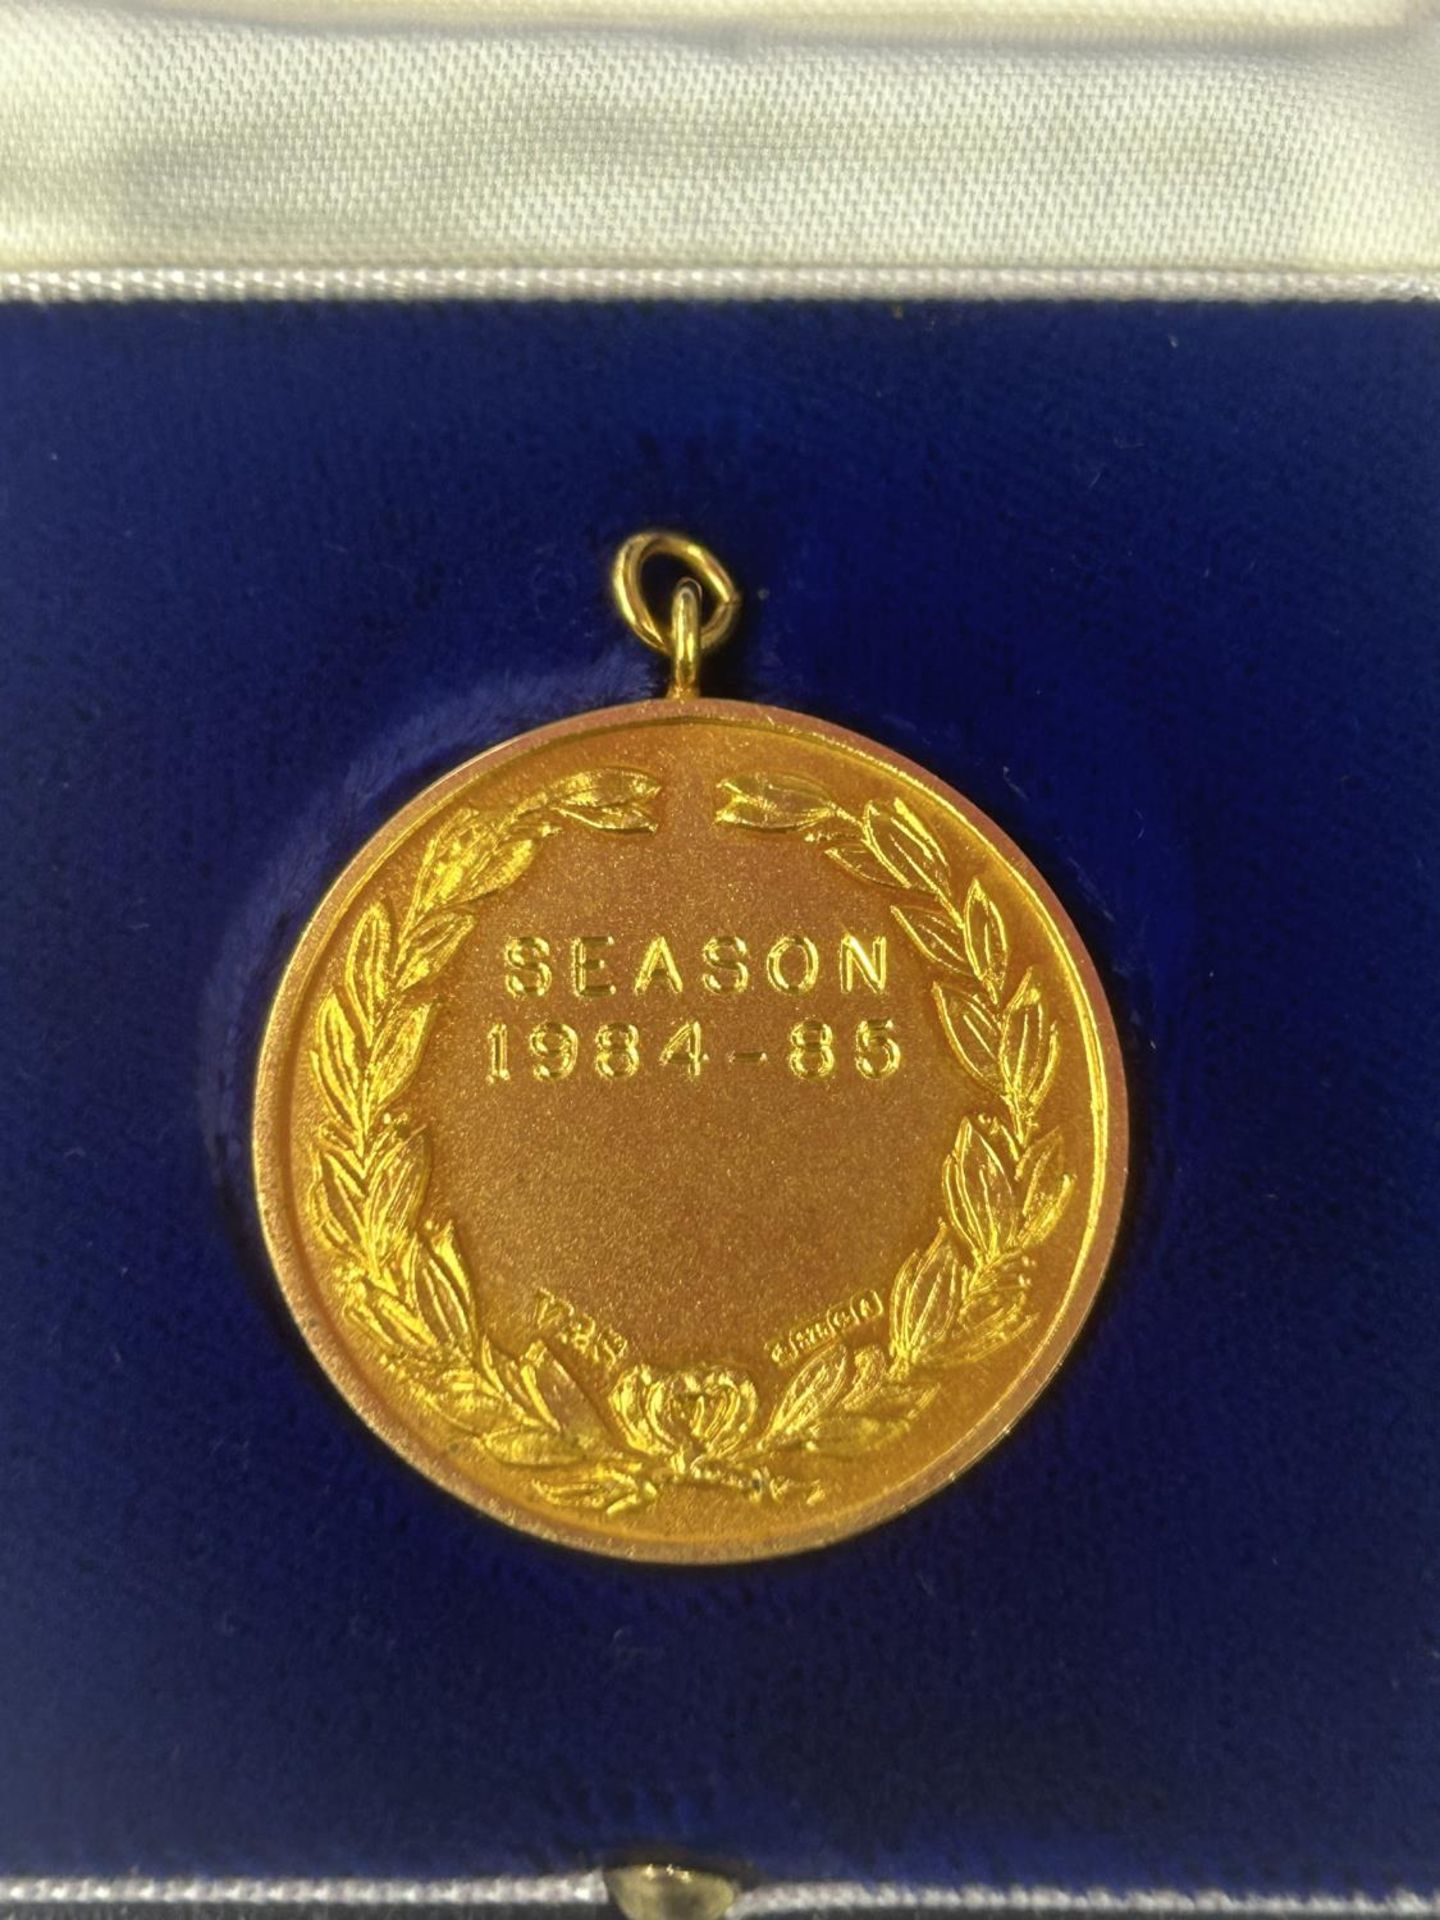 A HALLMARKED 9 CARAT GOLD & ENAMEL FOOTBALL LEAGUE CANON DIVISION 2 LEAGUE WINNERS MEDAL 1984-1985 - Image 3 of 5